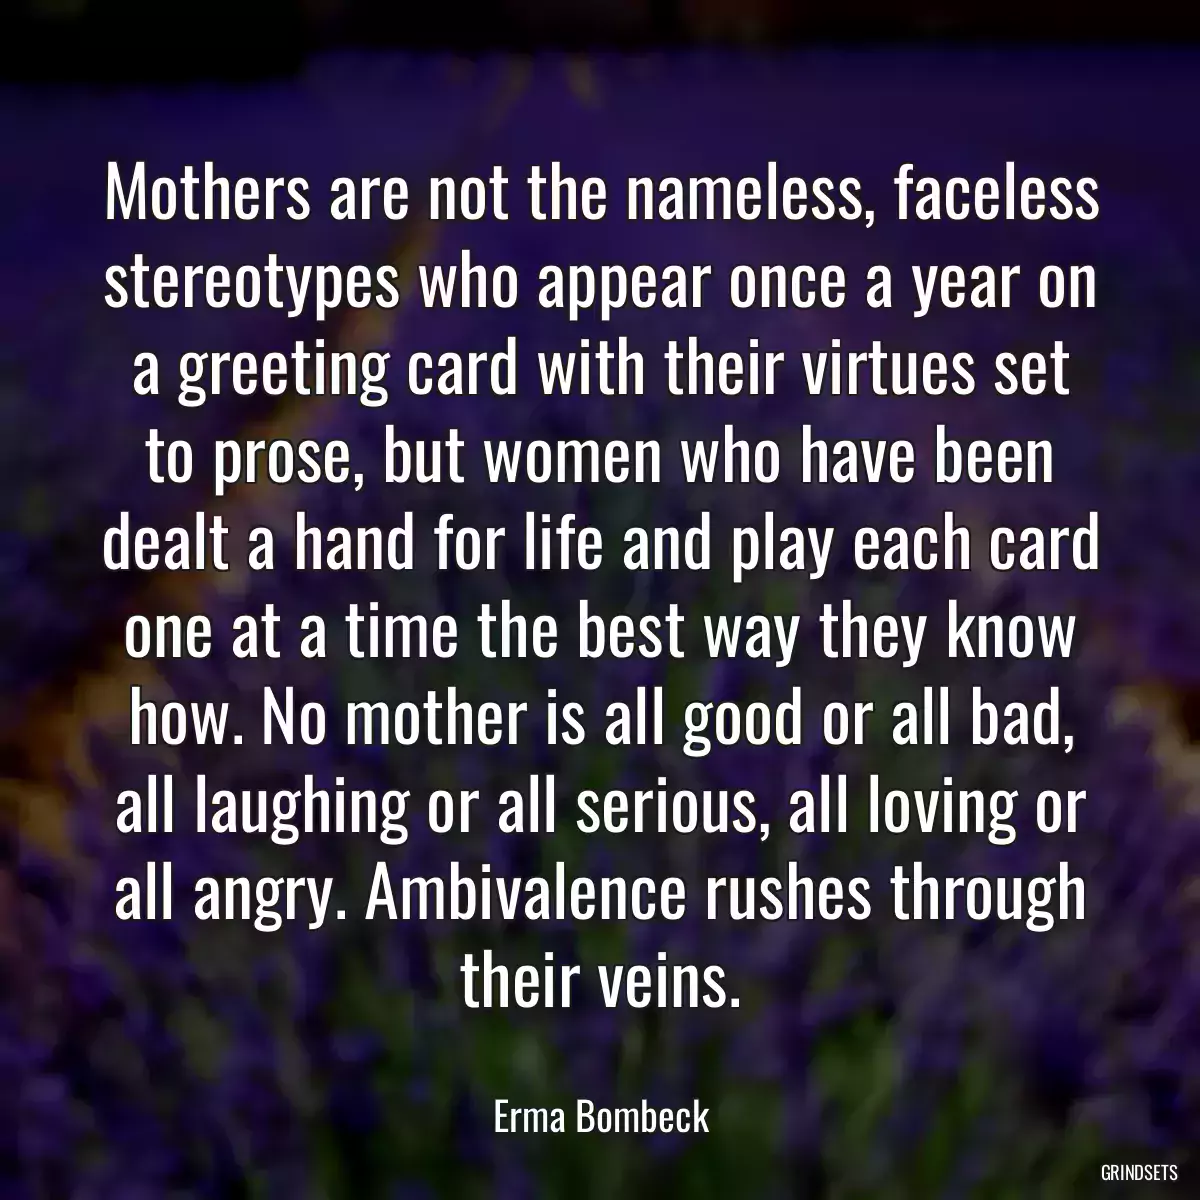 Mothers are not the nameless, faceless stereotypes who appear once a year on a greeting card with their virtues set to prose, but women who have been dealt a hand for life and play each card one at a time the best way they know how. No mother is all good or all bad, all laughing or all serious, all loving or all angry. Ambivalence rushes through their veins.